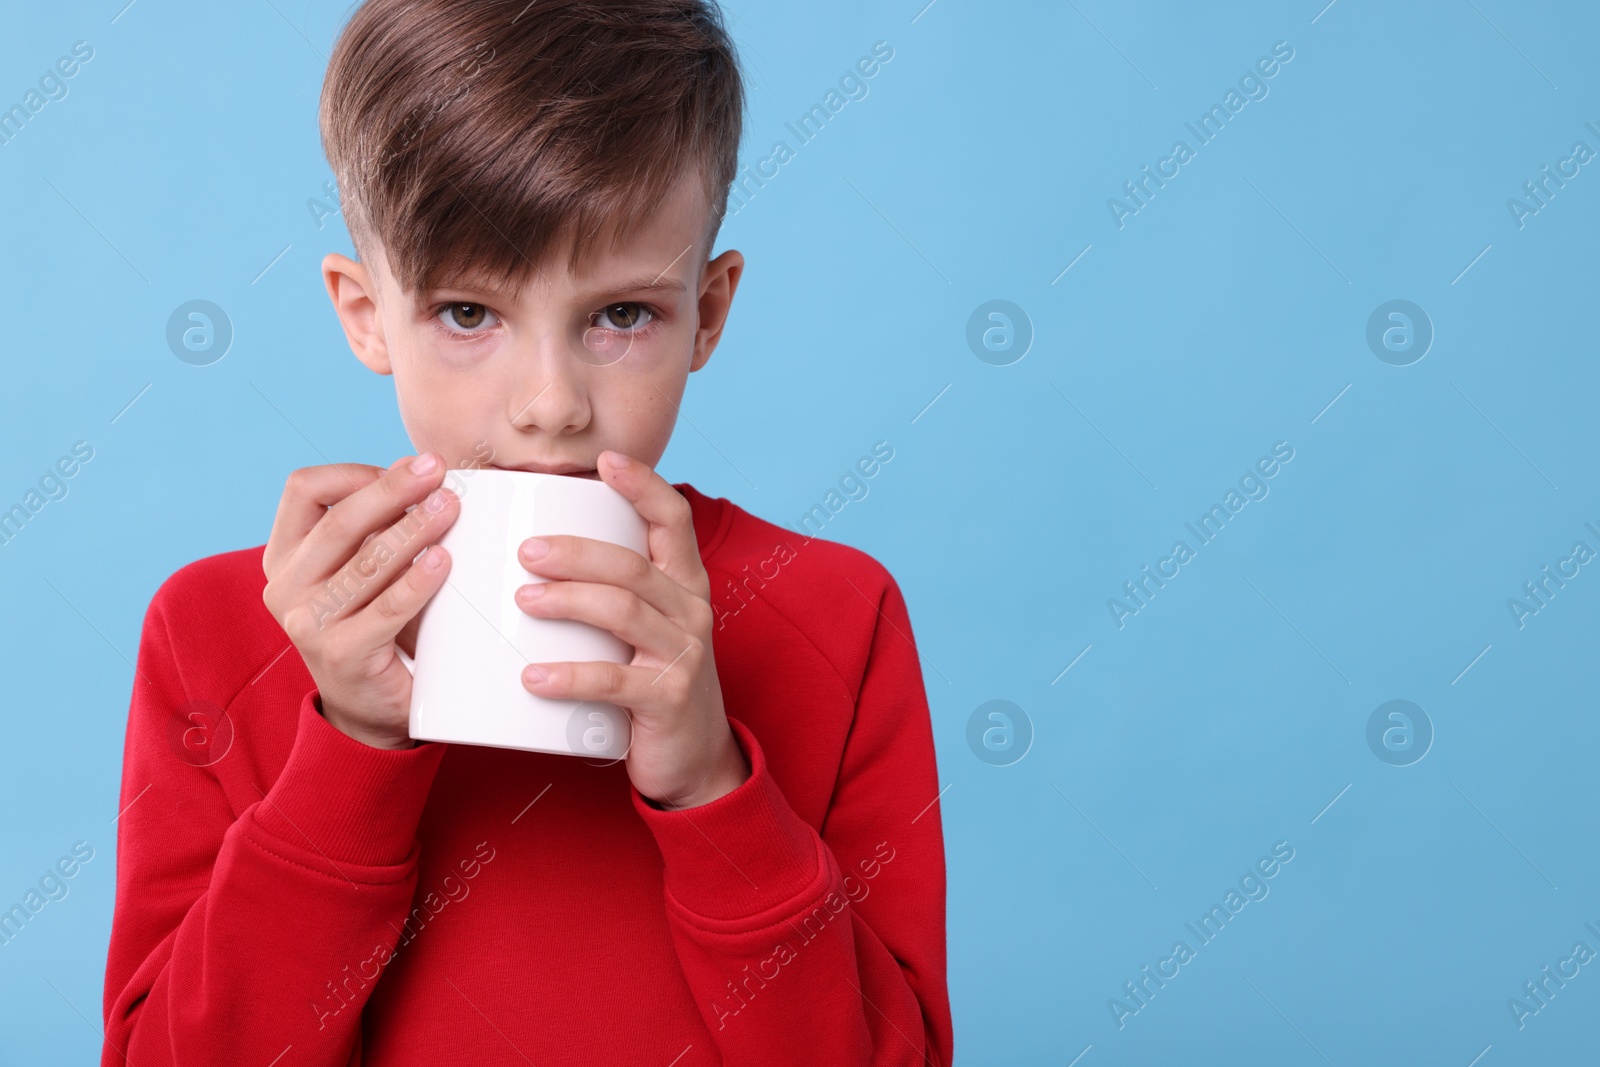 Photo of Cute boy drinking beverage from white ceramic mug on light blue background, space for text